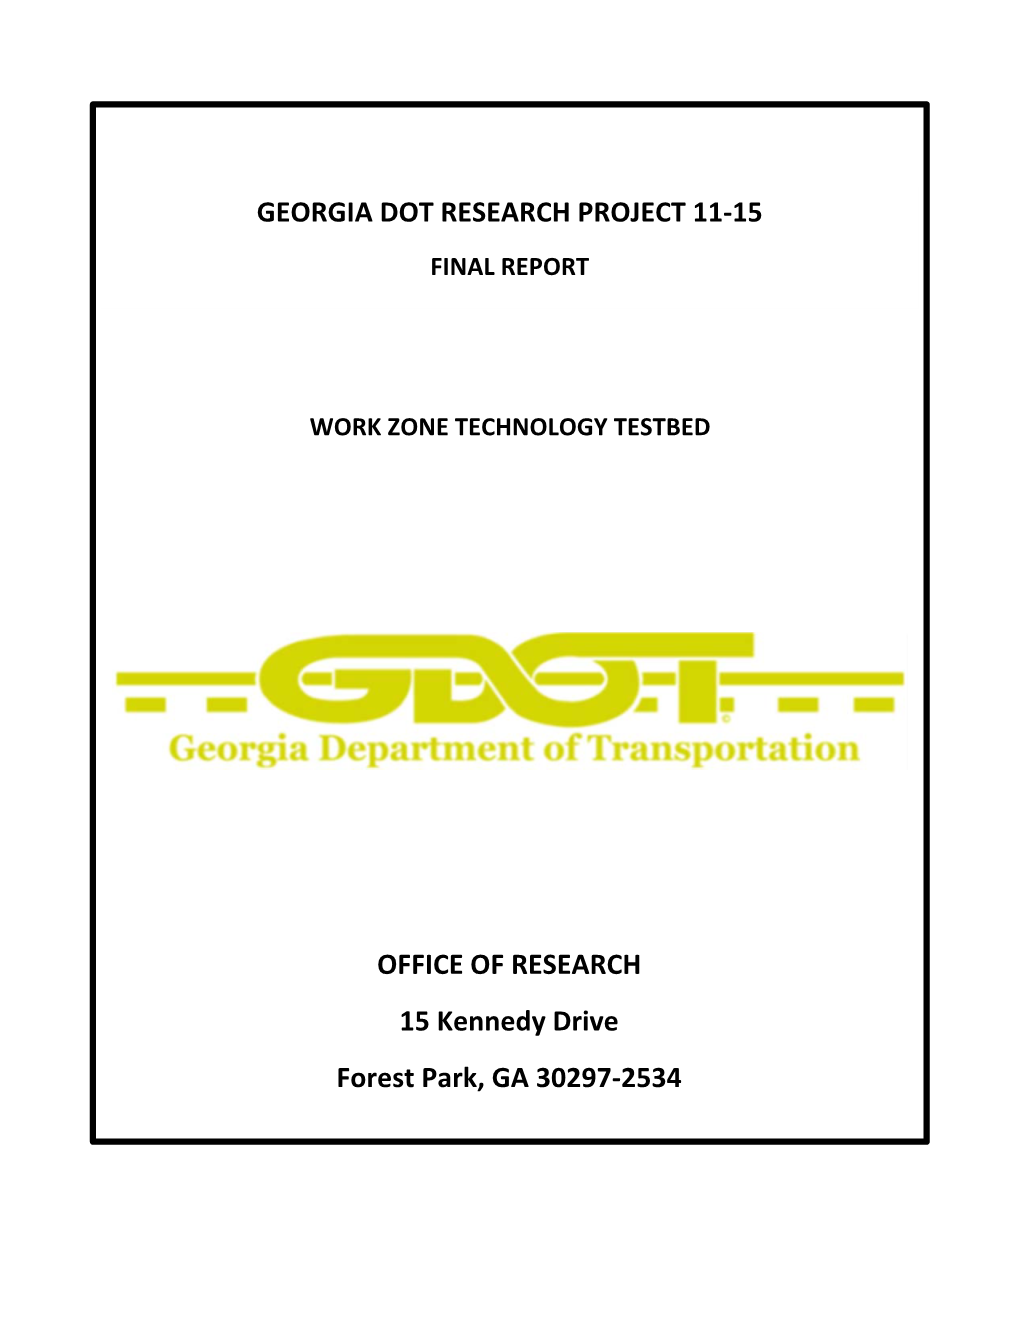 Georgia Dot Research Project 11-15